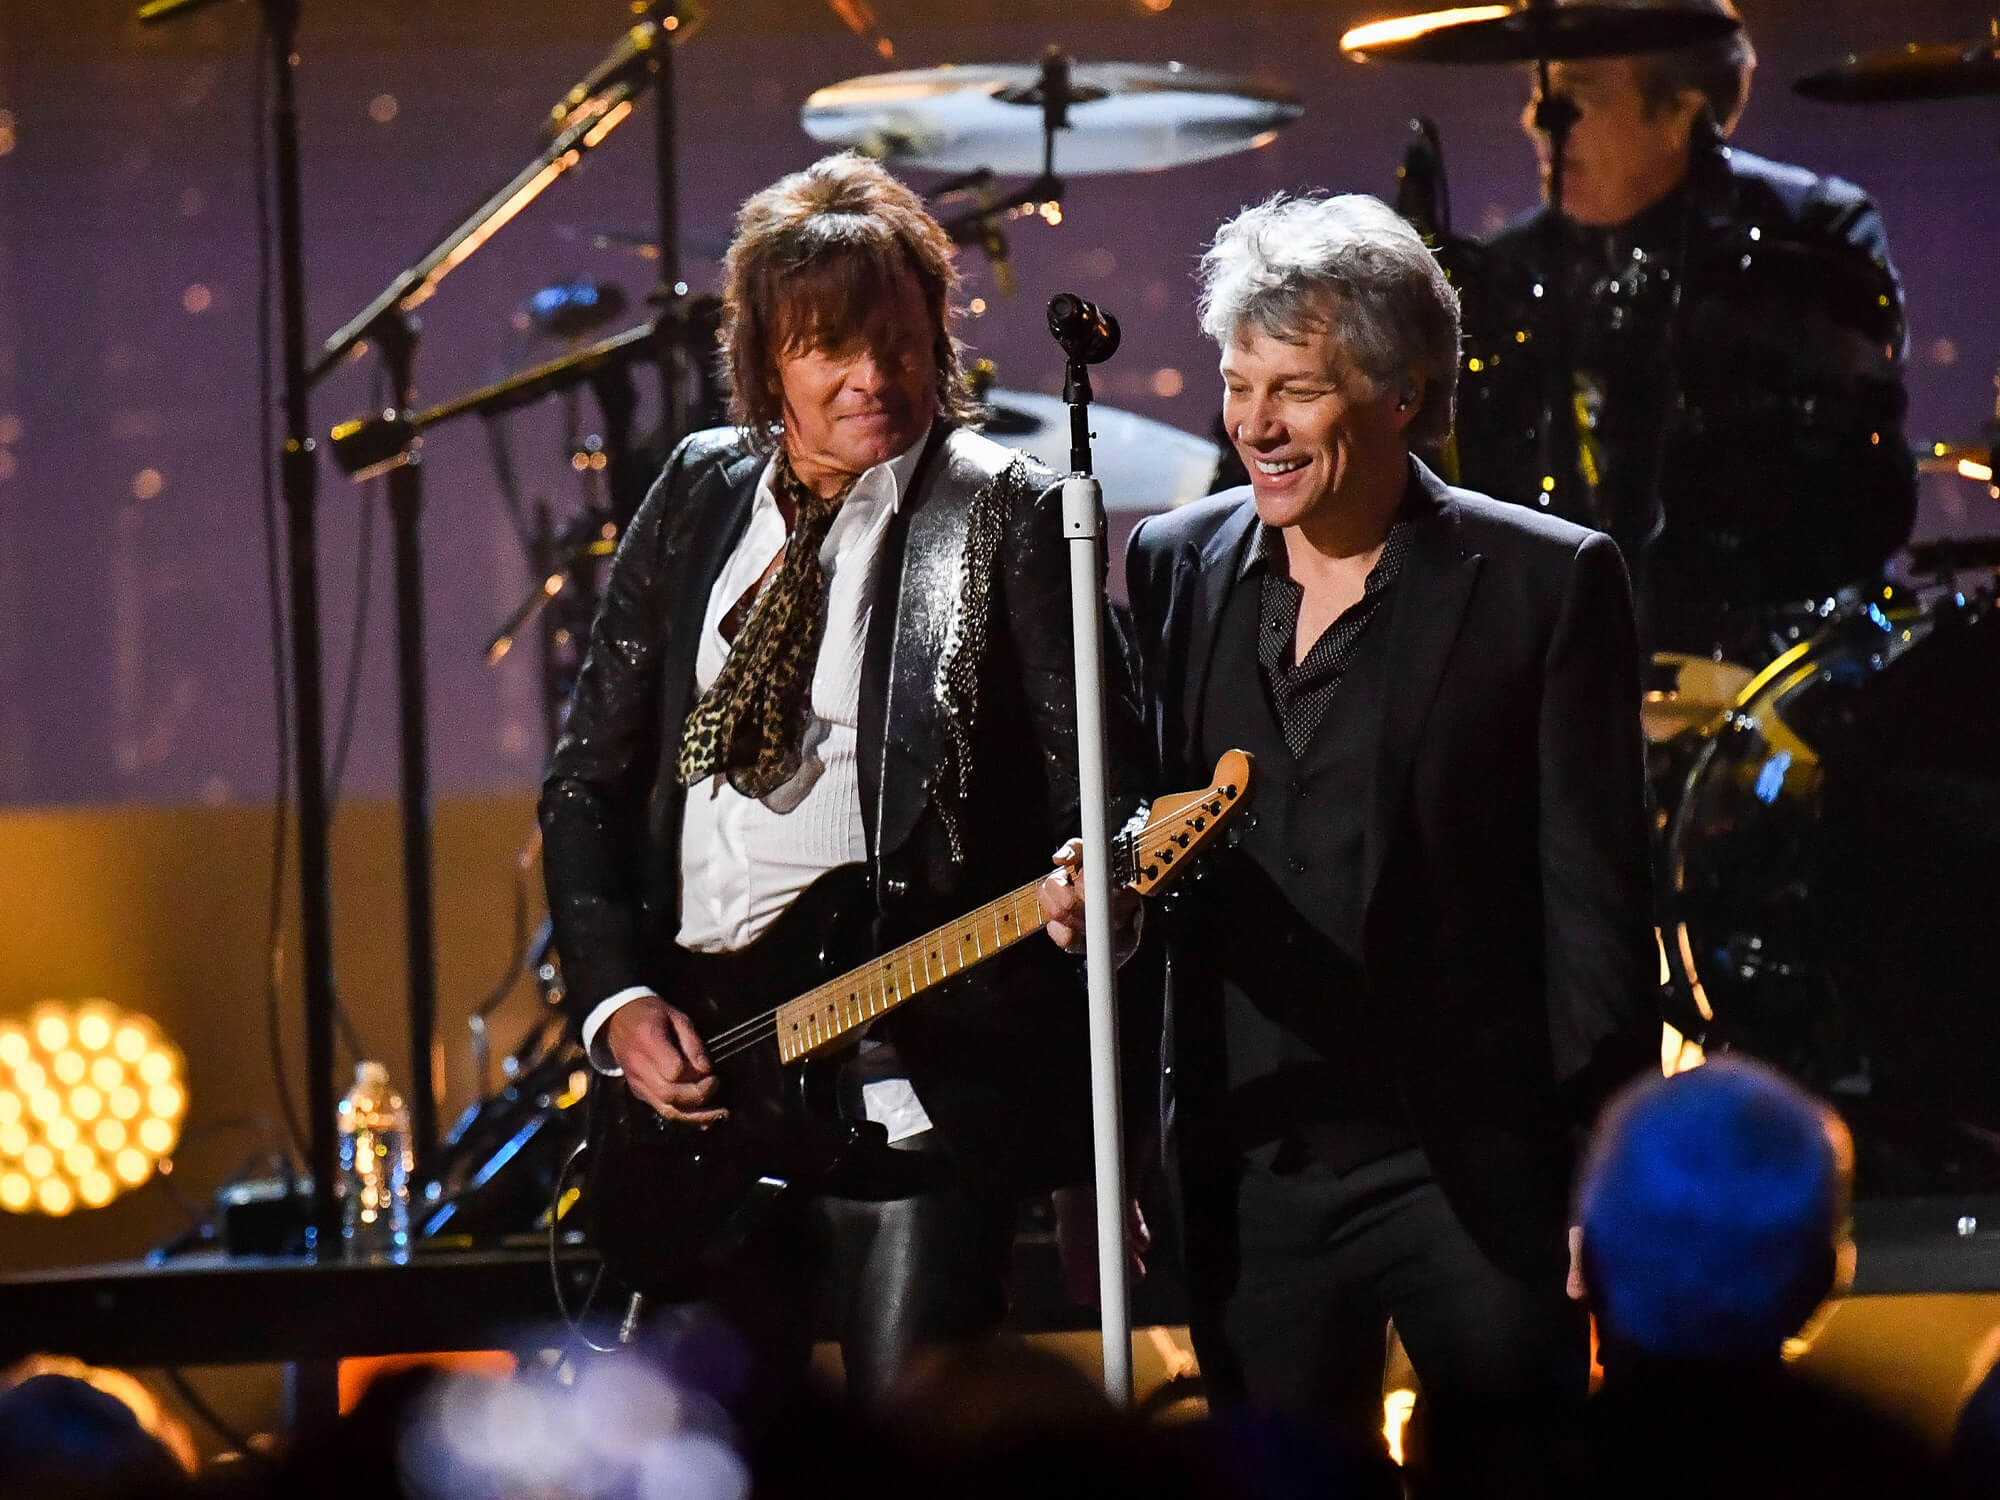 Richie Sambora and Jon Bon Jovi on stage. Richie has his guitar in hand, and Jon is standing by a mic stand and smiling.